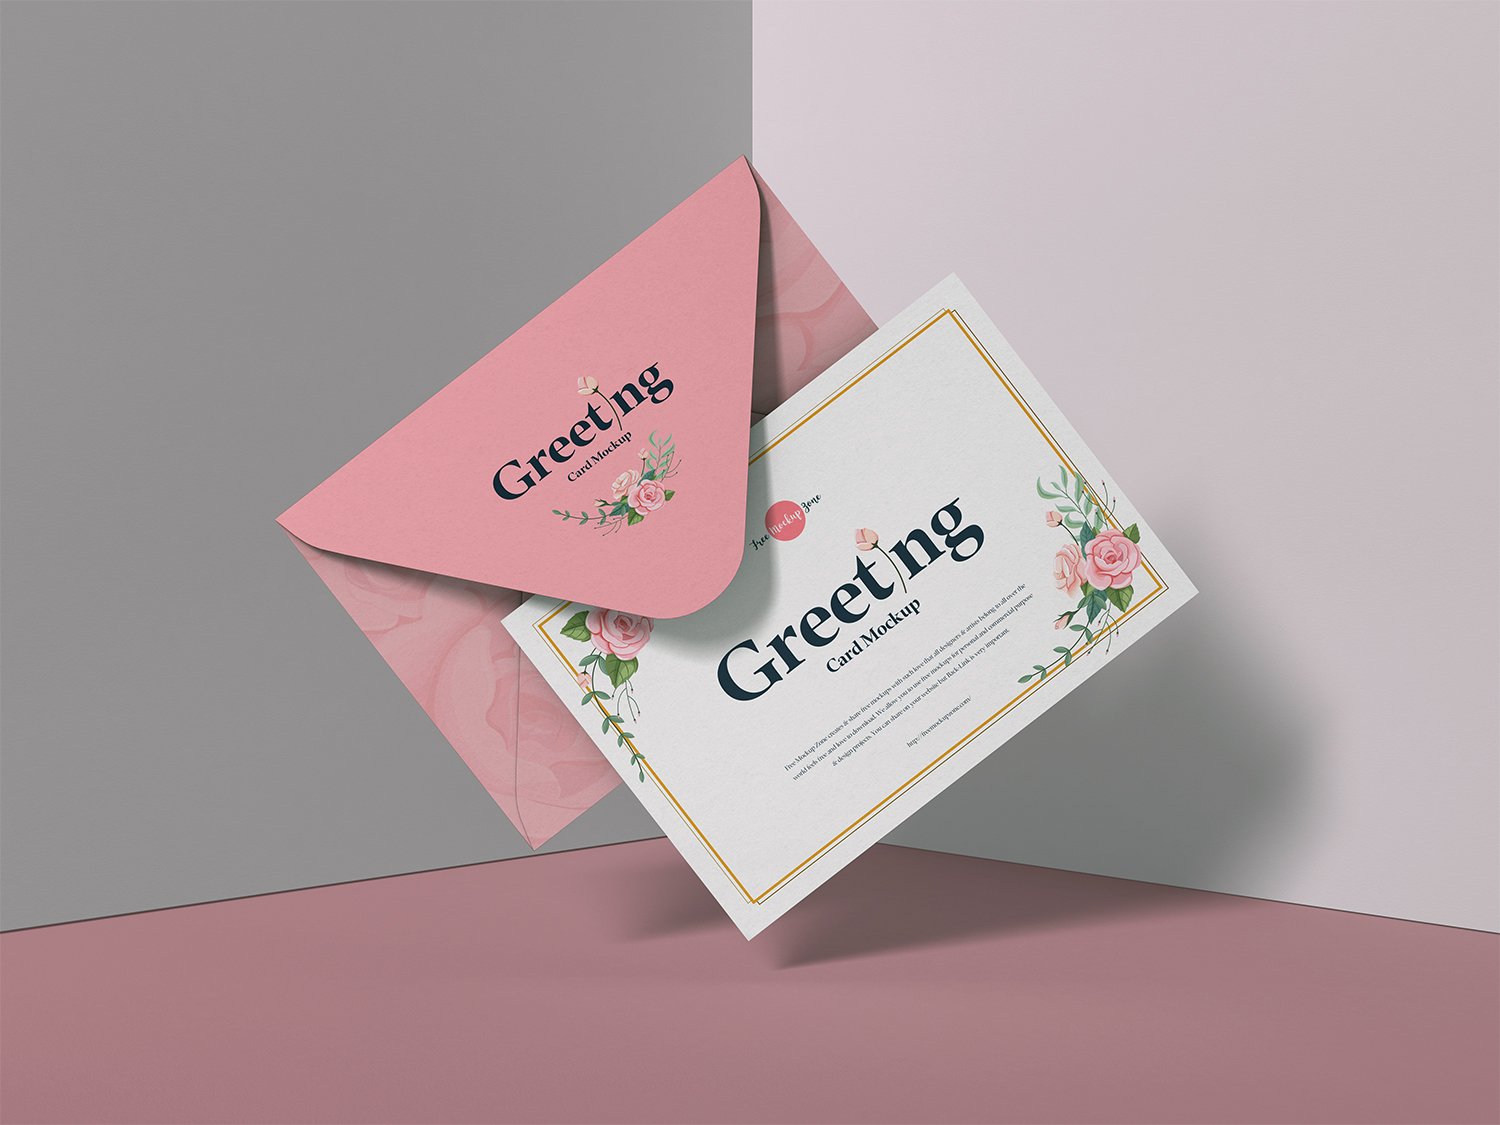 Download 30+ Free Greeting Card Mockups in PSD | Free PSD Templates